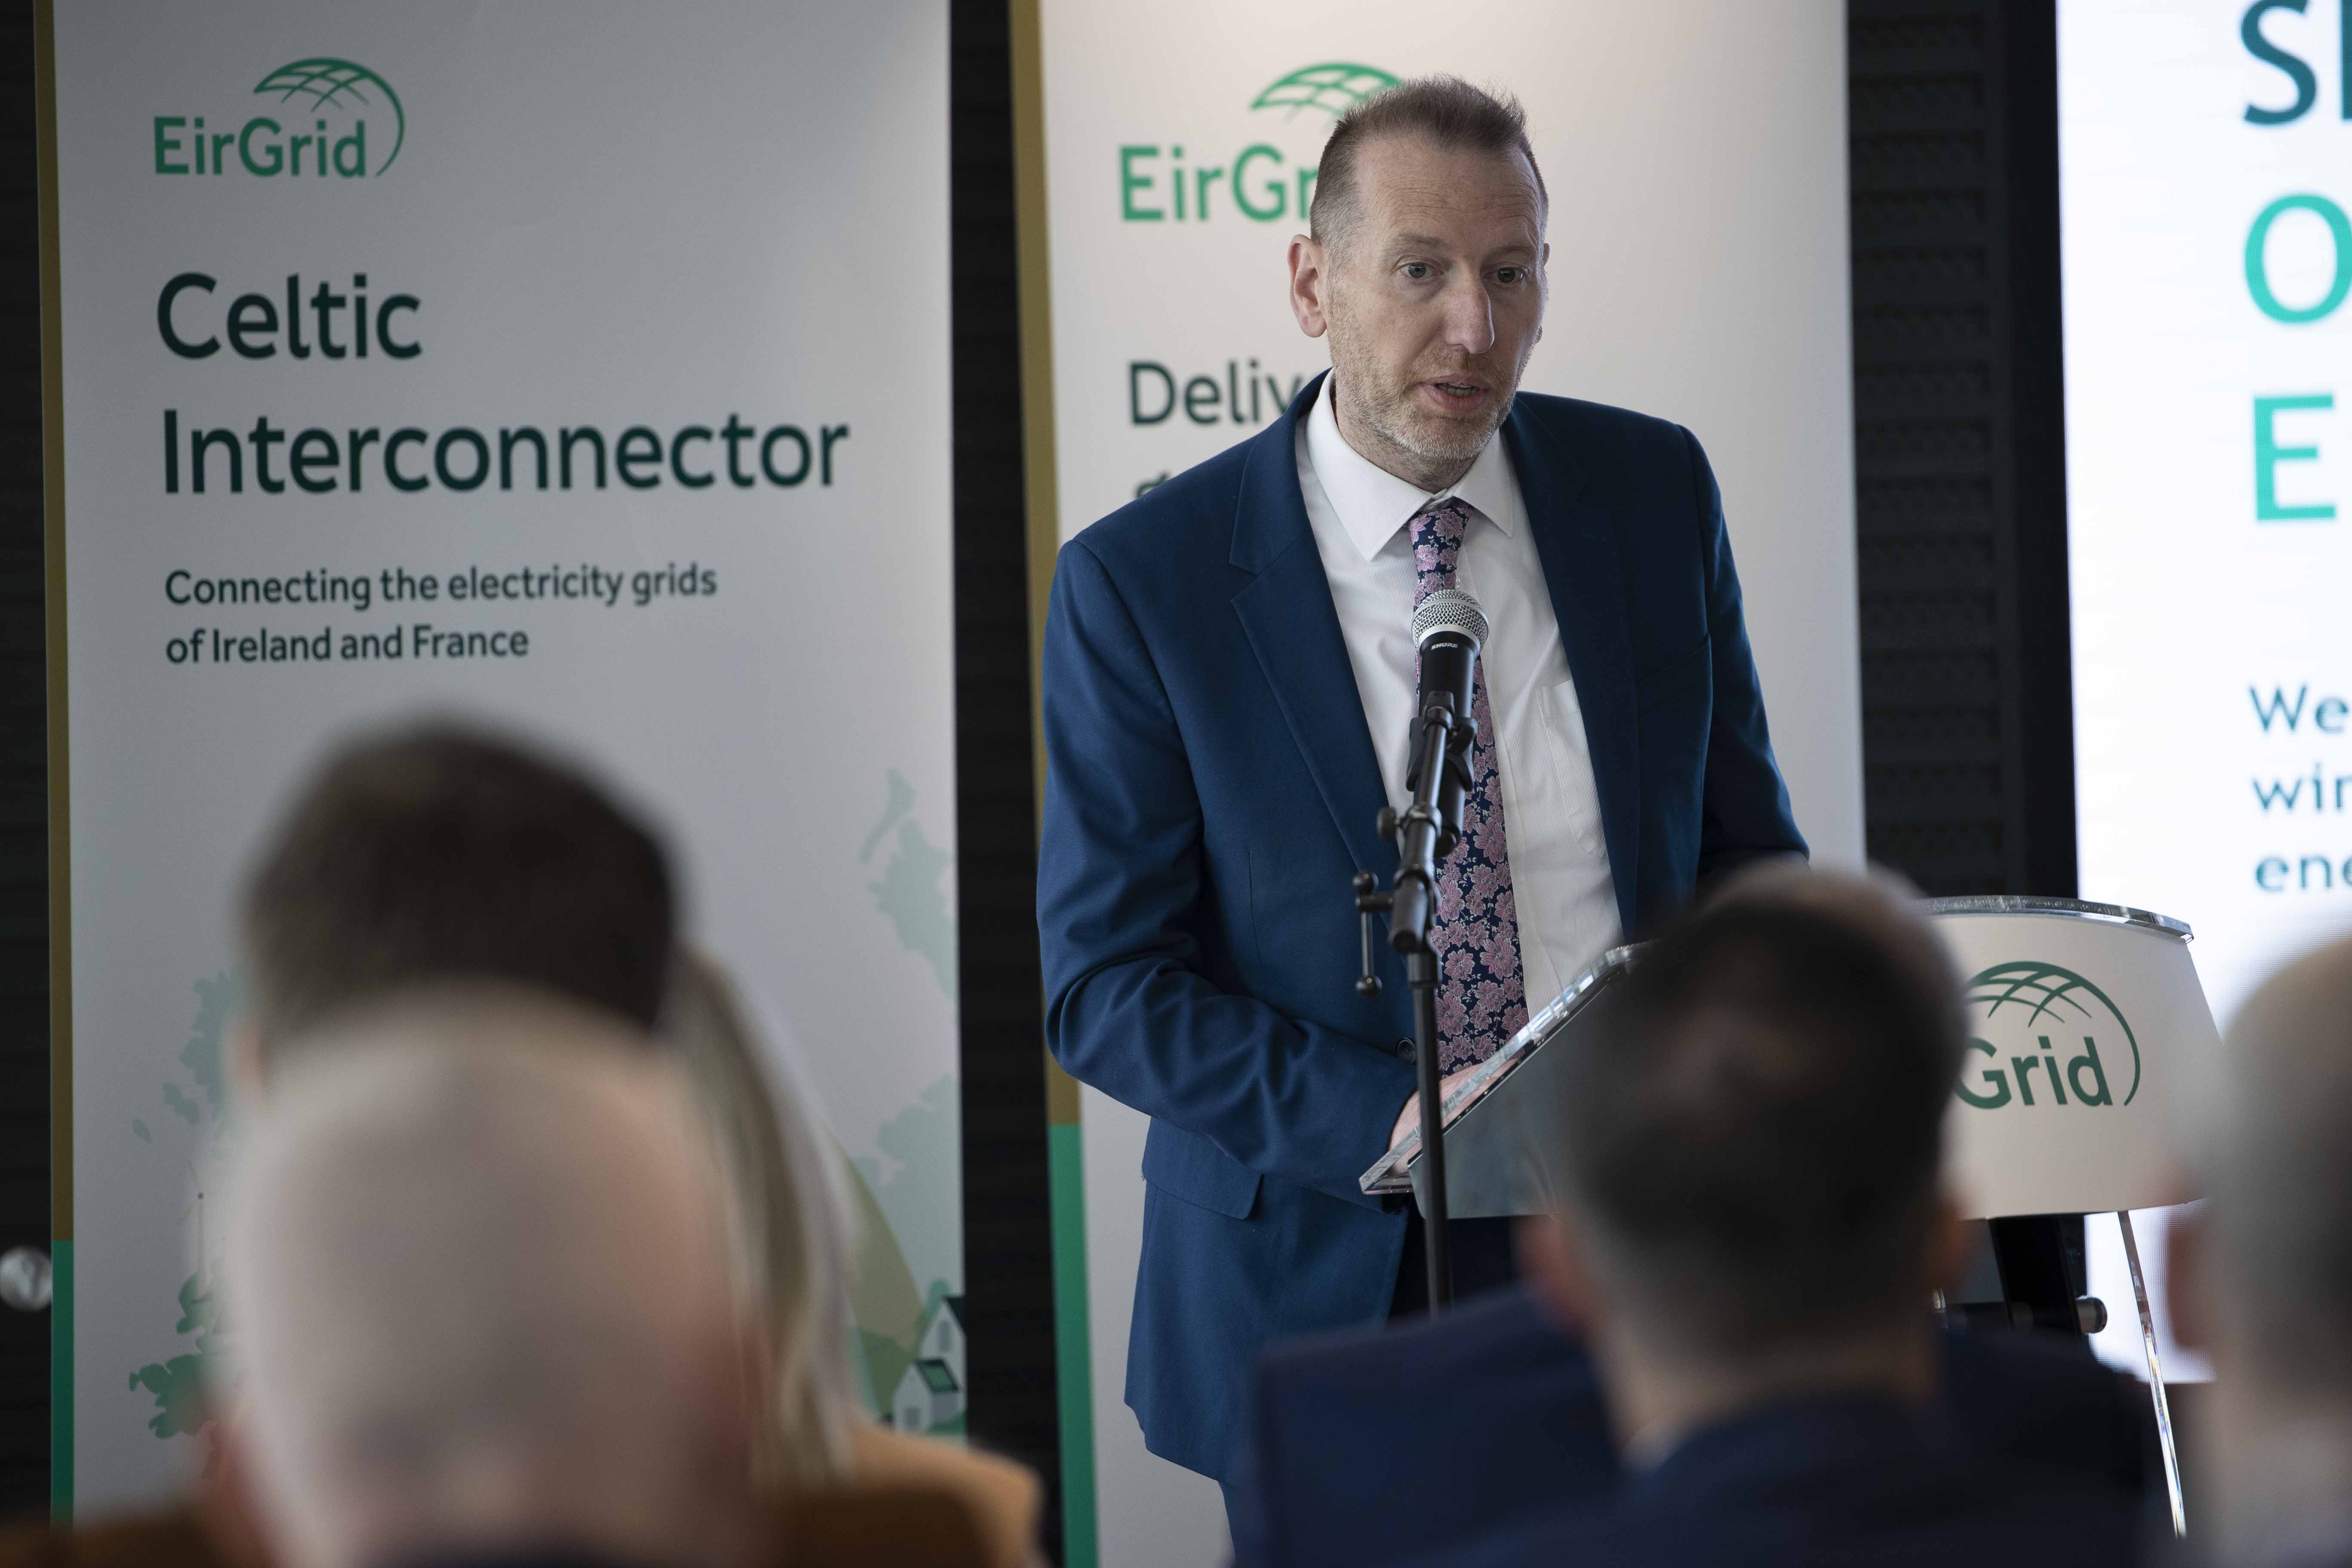 EirGrid Chief Infrastructure Officer Michael Mahon